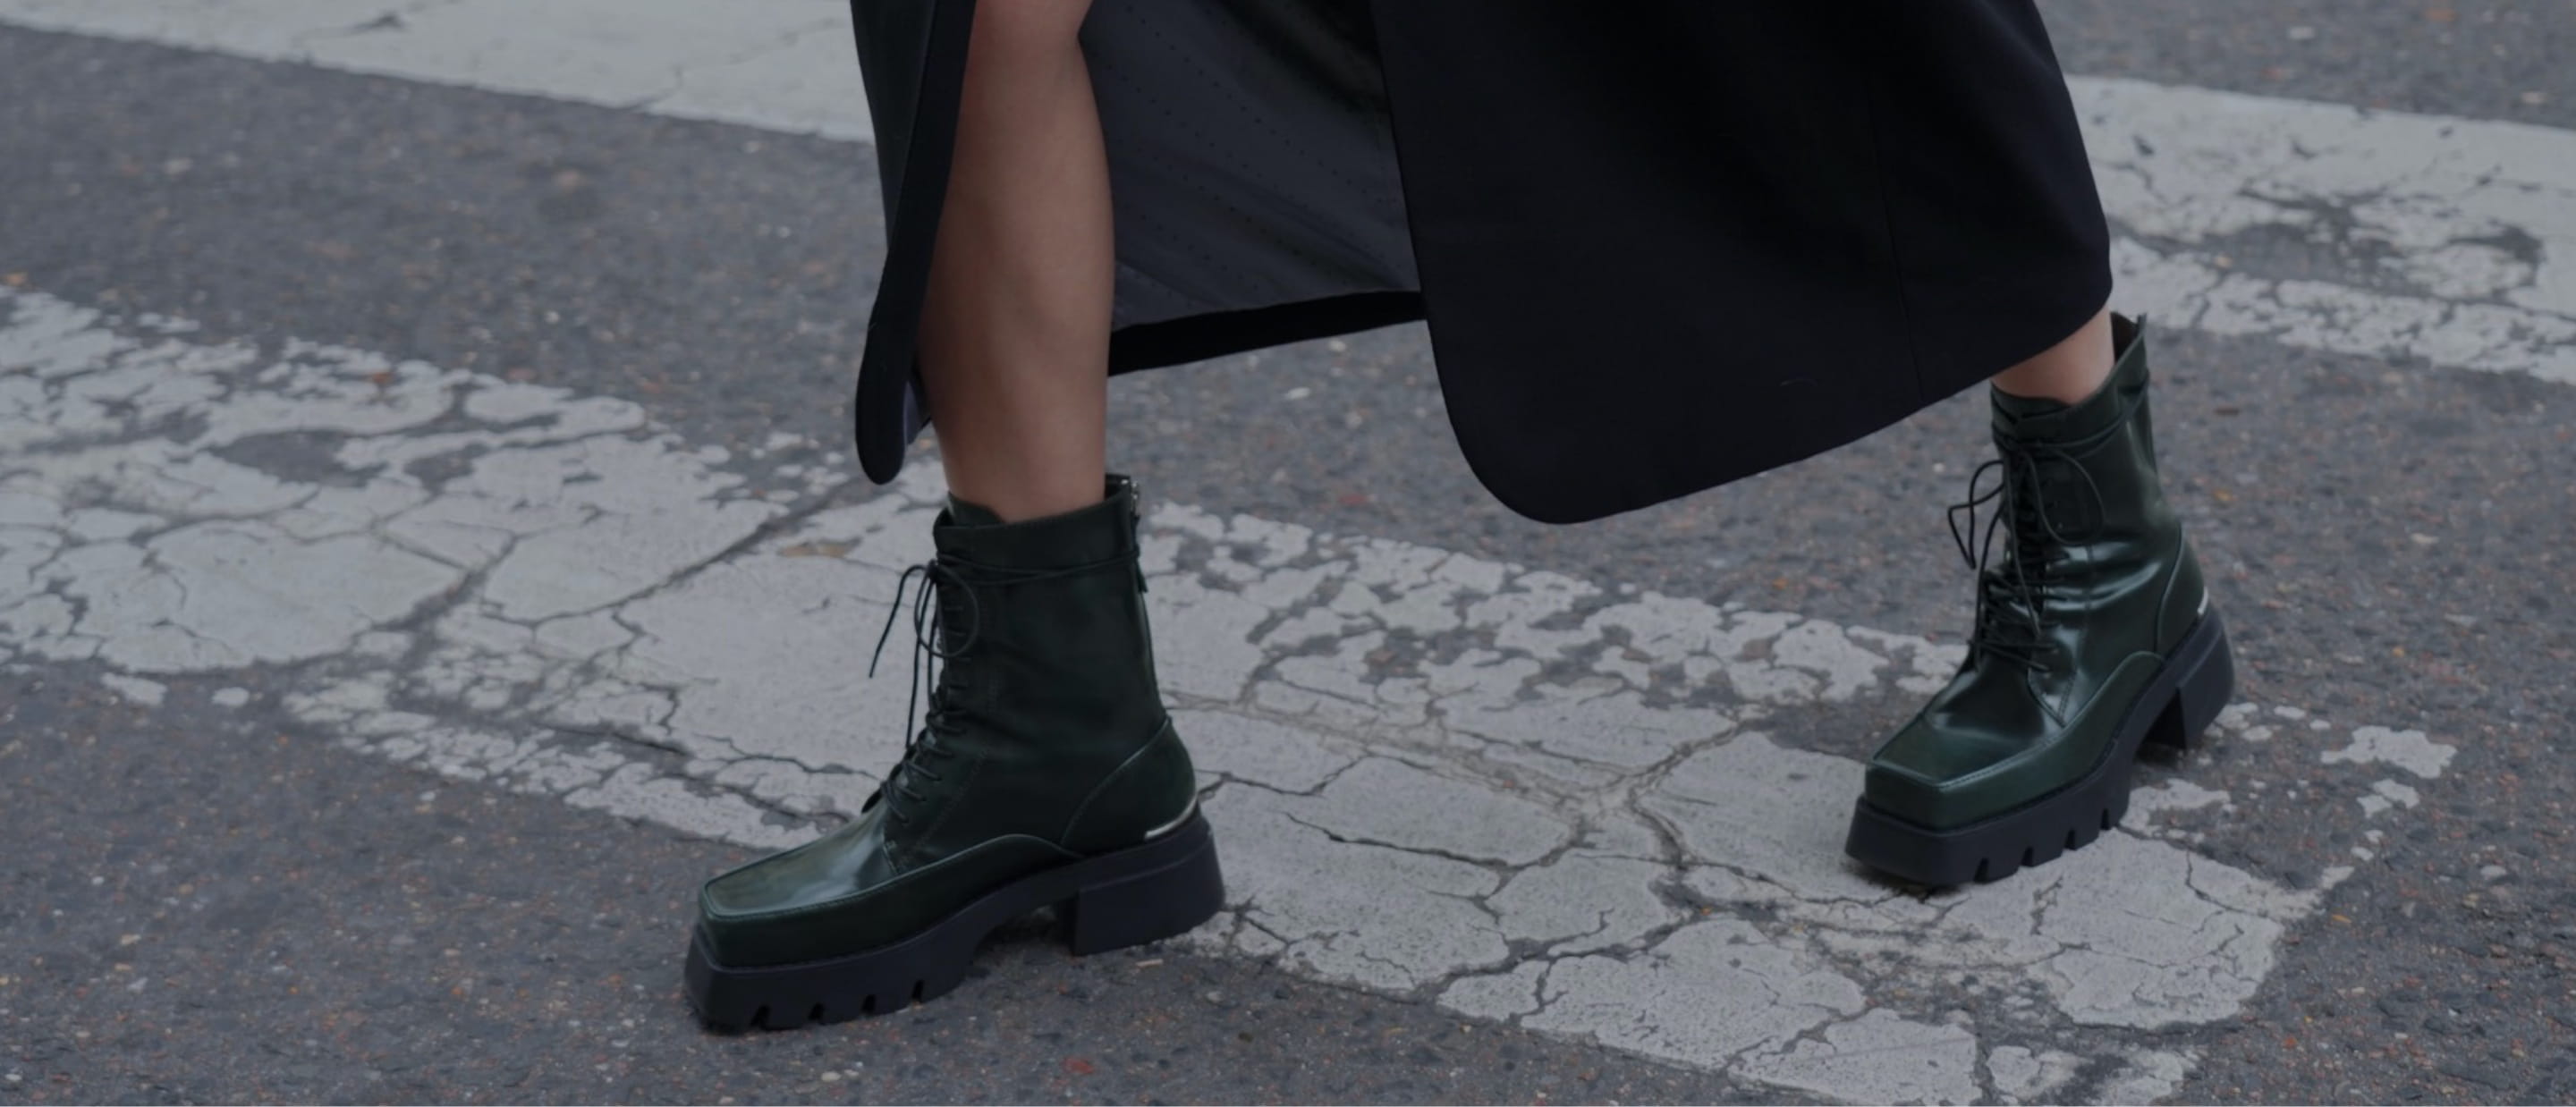 Lace-up platform calf boots in dark green - CHARLES & KEITH